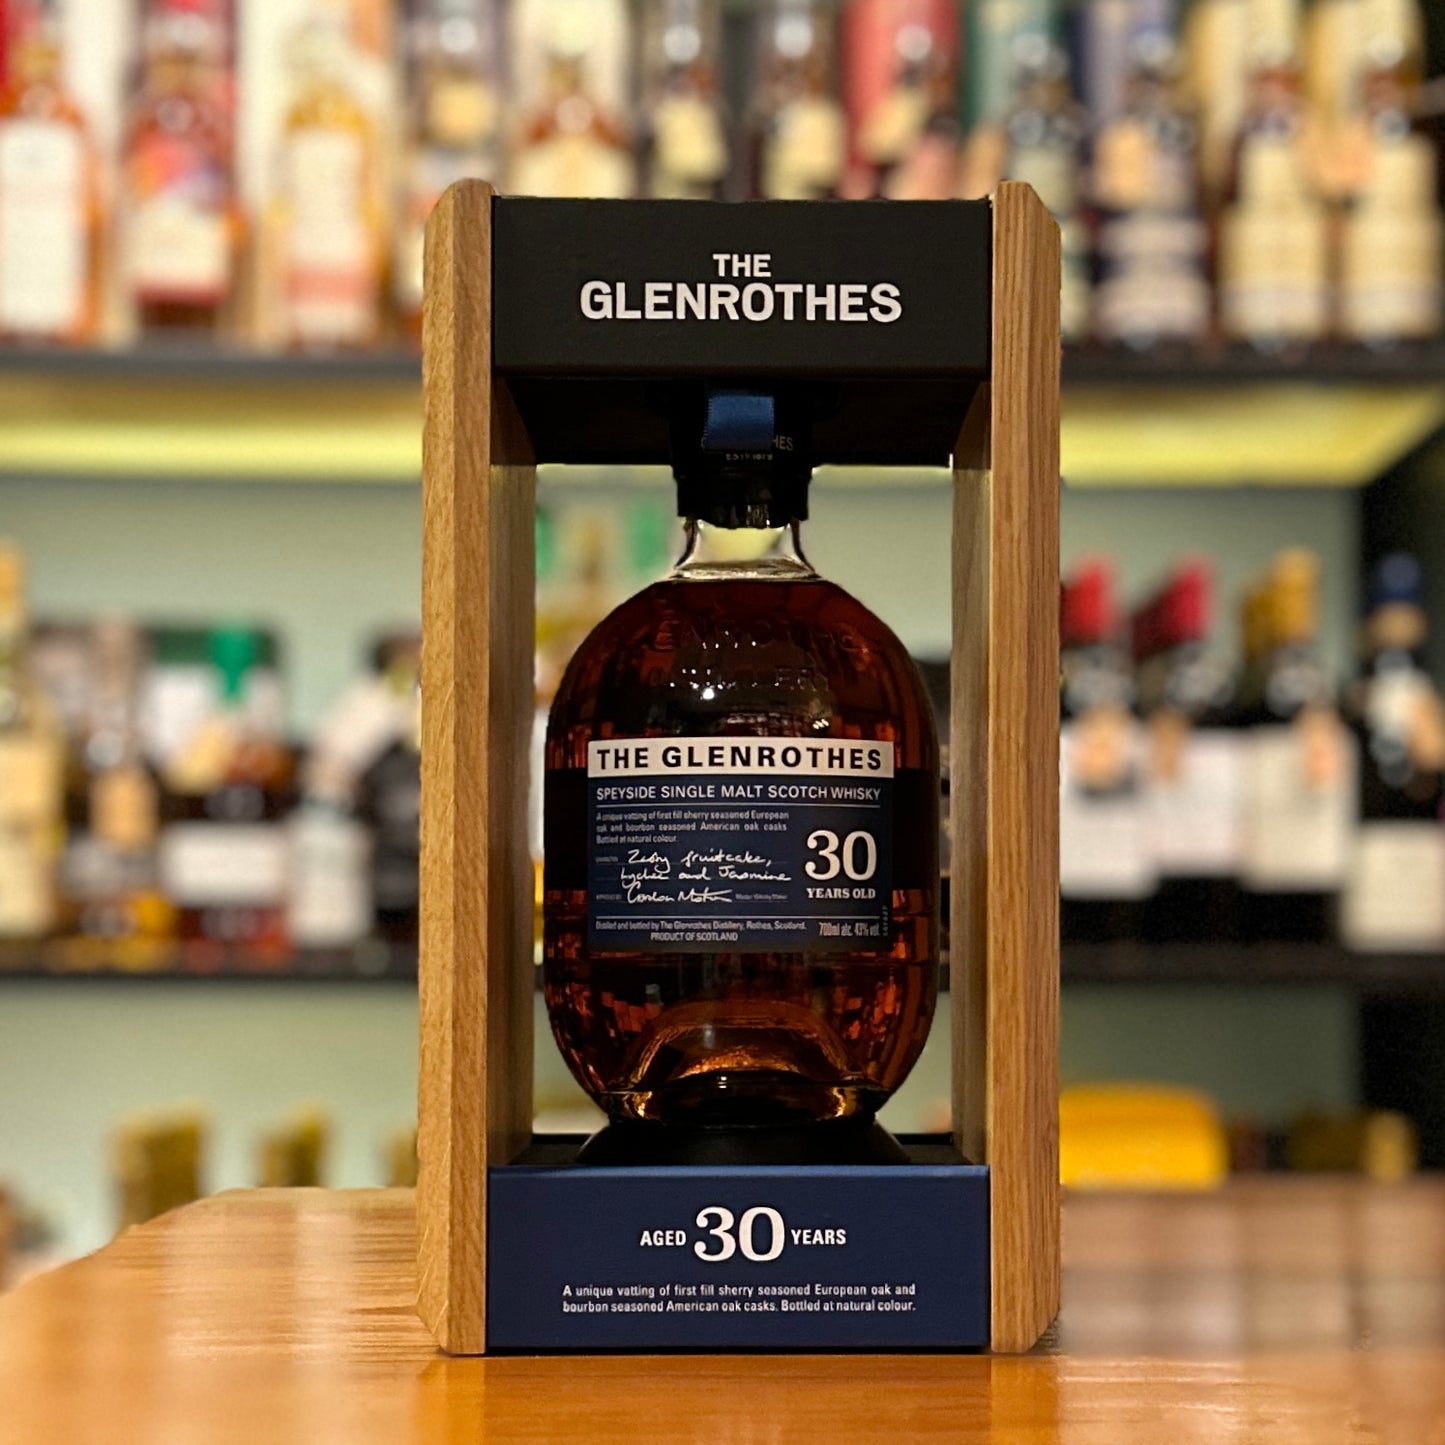 Glenrothes 30 Year Old “The Aqua Collection” Single Malt Scotch Whisky